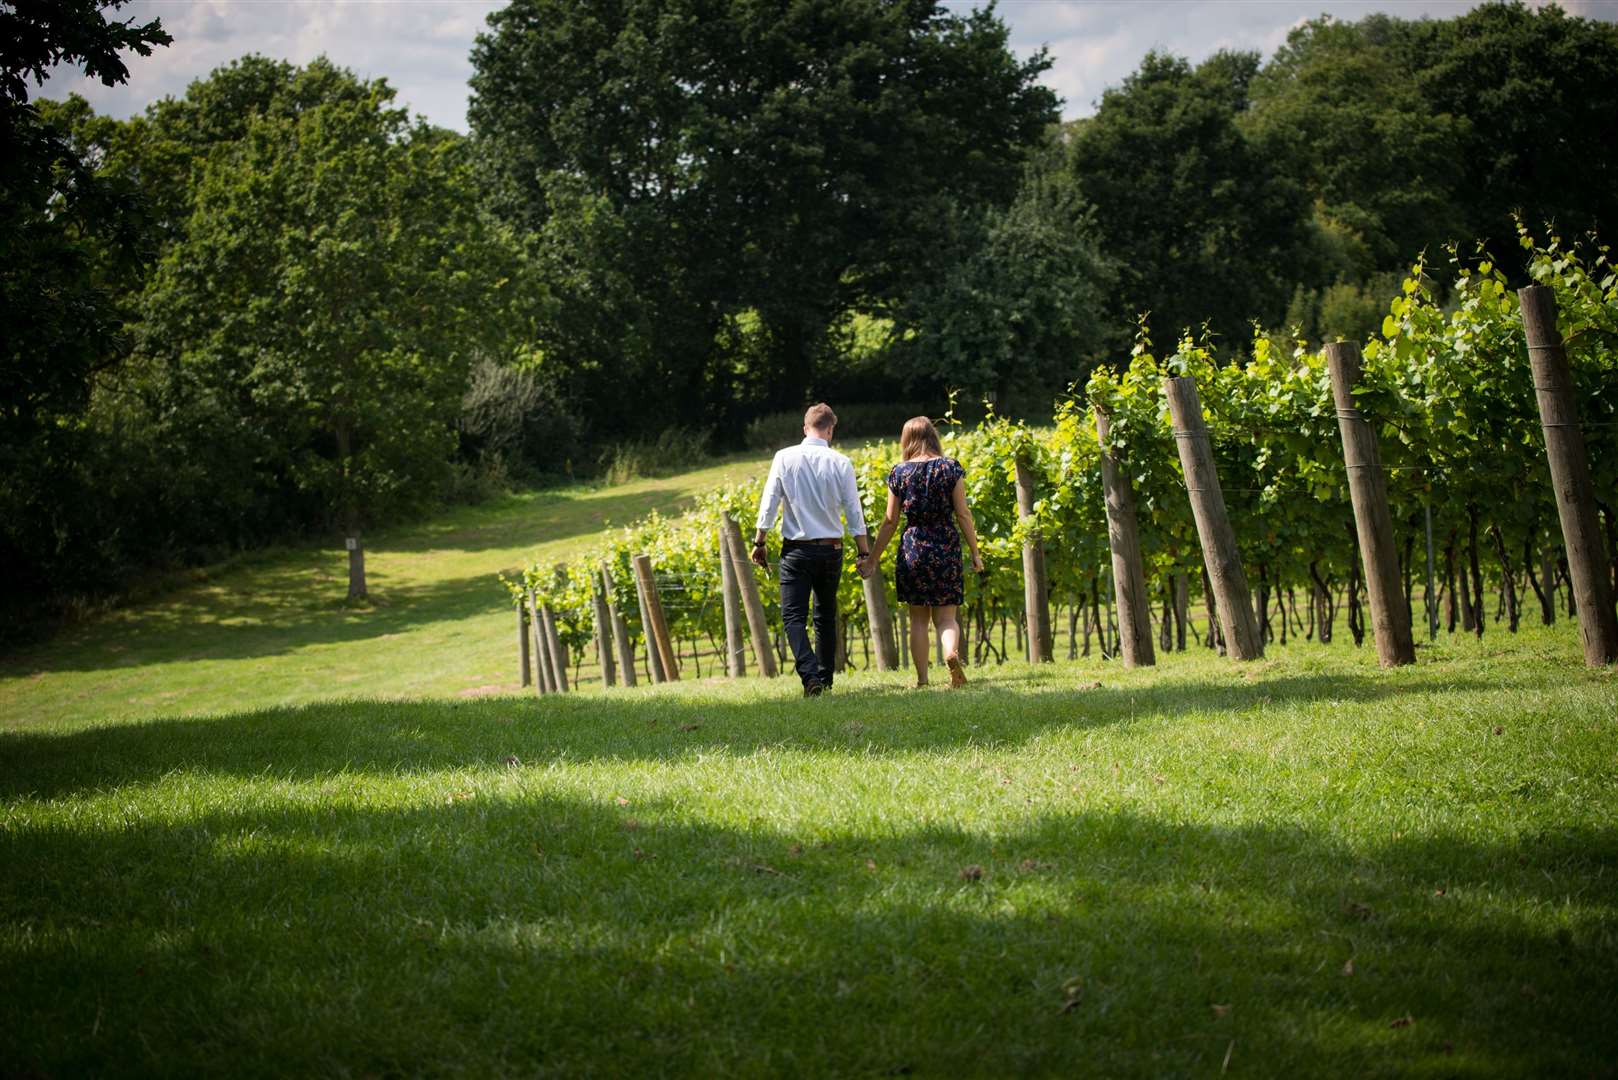 Explore Chapel Down's vineyard as a couple with this special tour. Picture: Chris Gale / Storm Studios